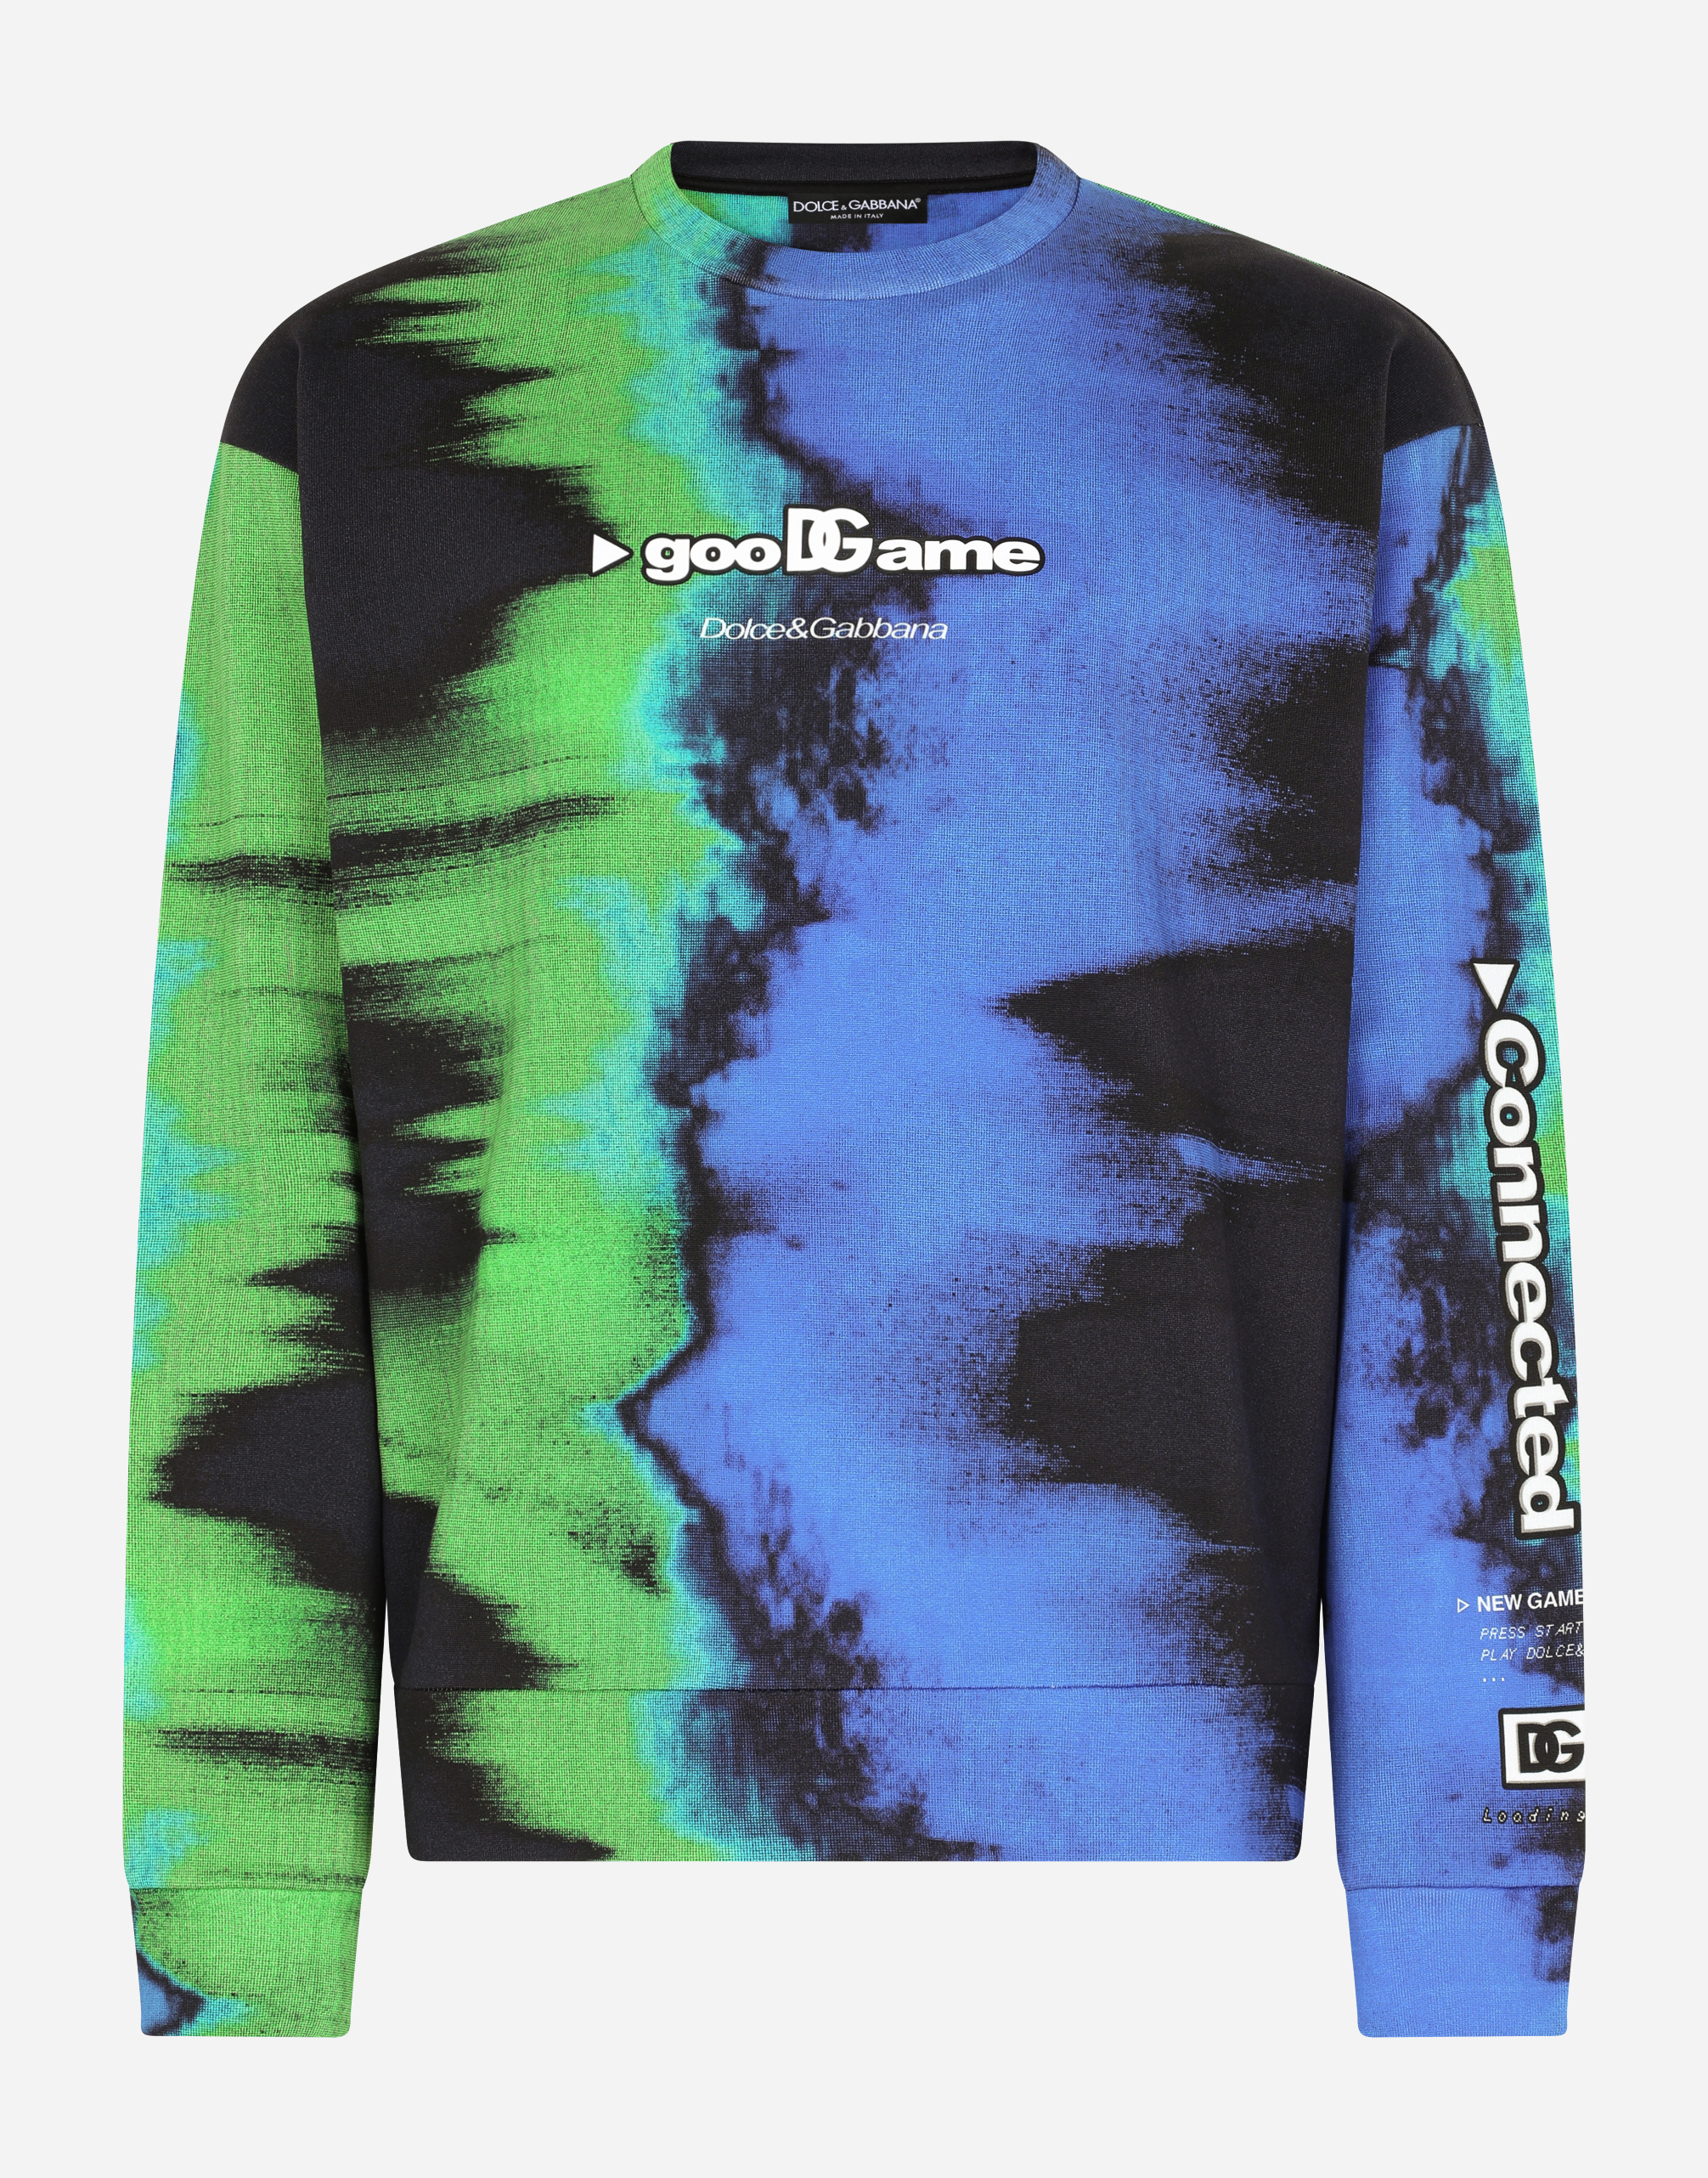 Multi-colored jersey sweatshirt with GooDGame print in Multicolor